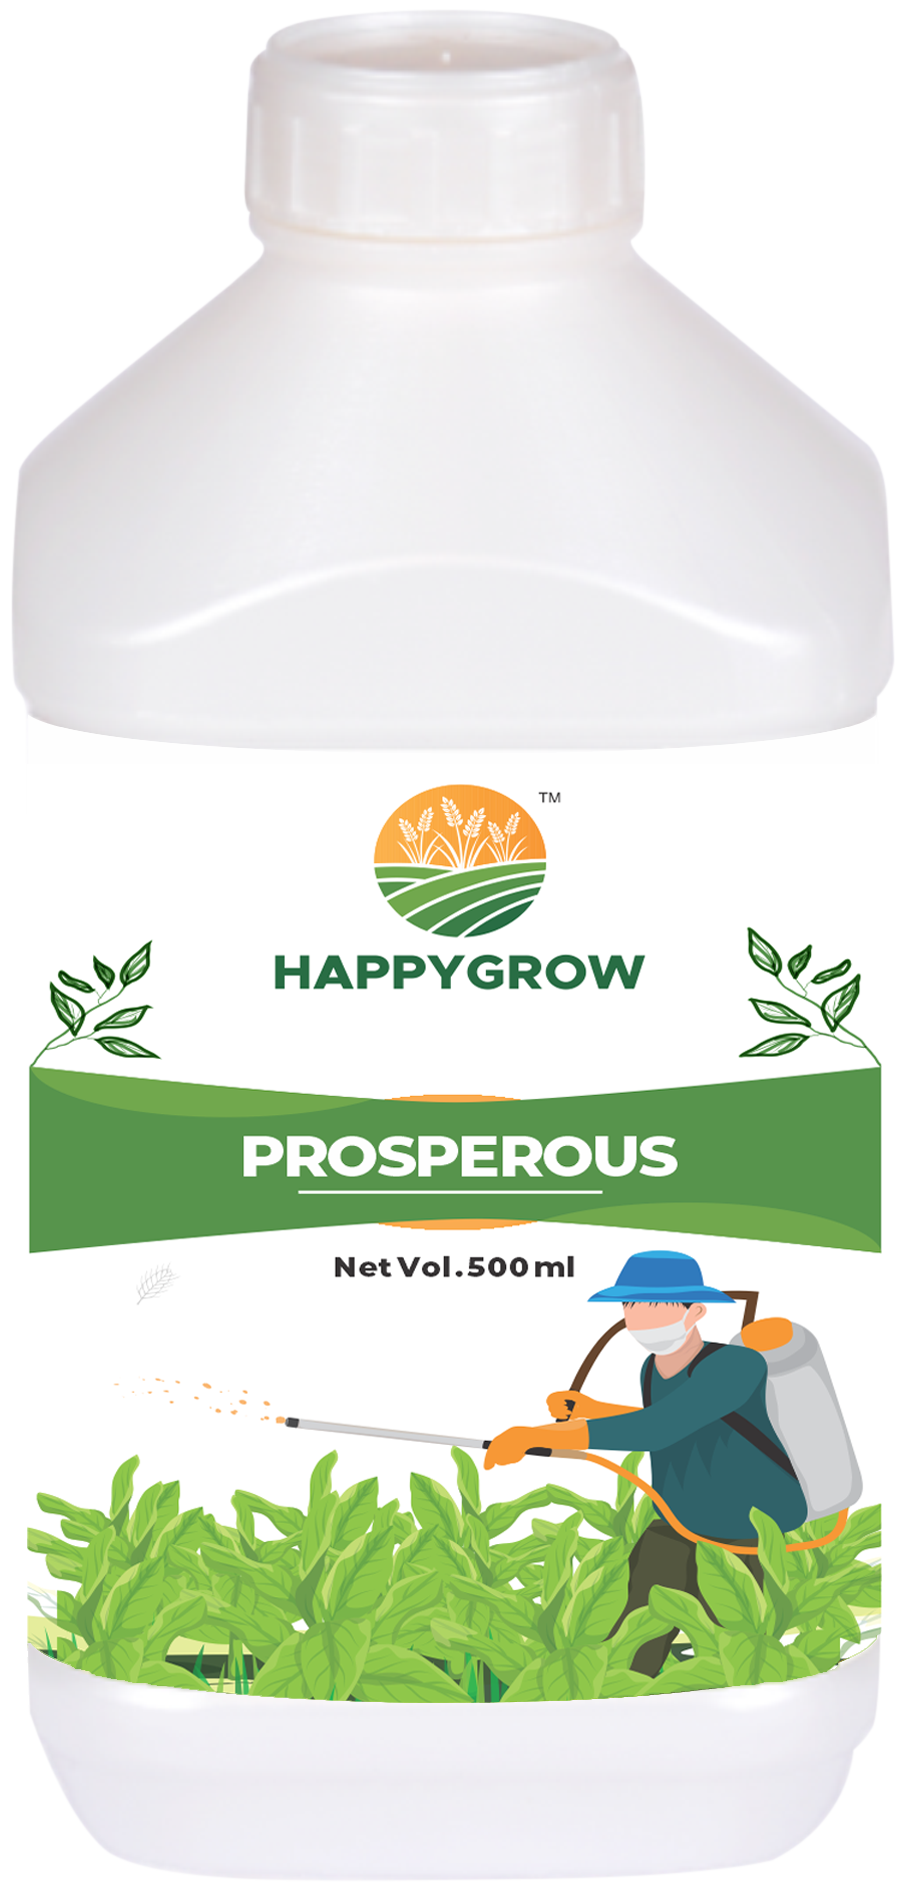 Prosperous - Growth Promoter: high-quality organic manure for agriculture